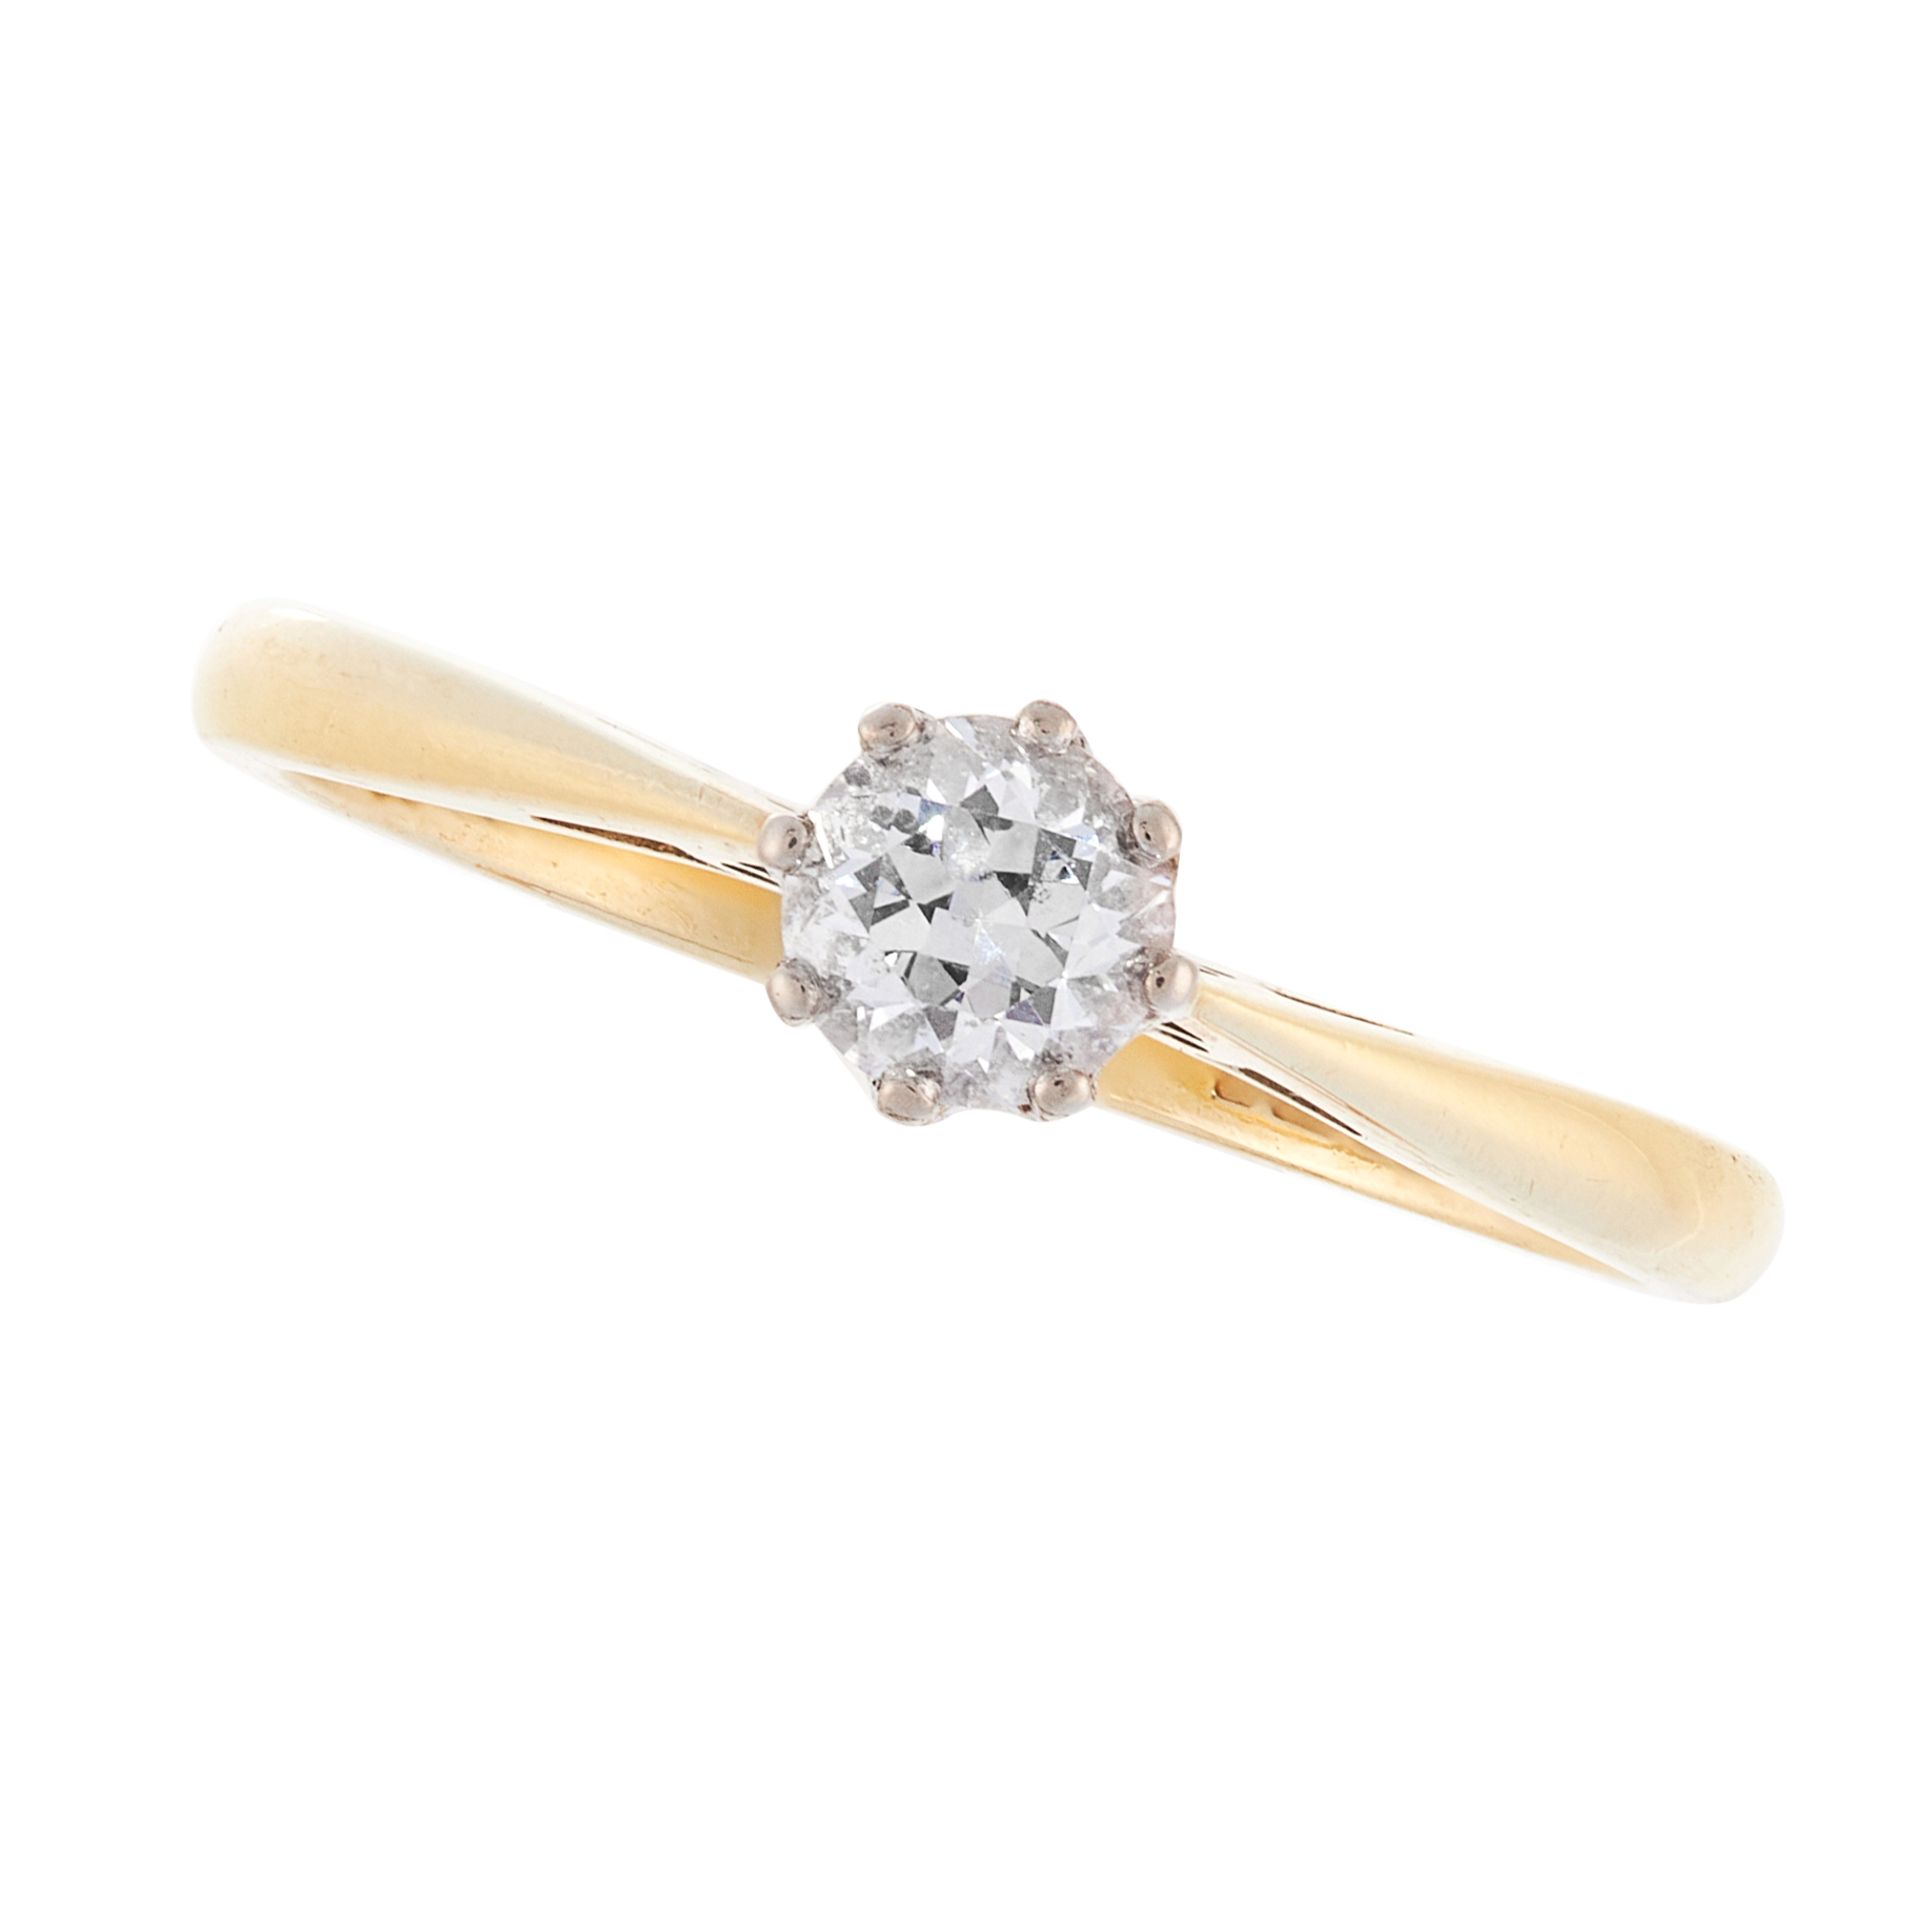 A SOLITAIRE DIAMOND DRESS RING in 18ct yellow gold, set with a round cut diamond of 0.38 carats